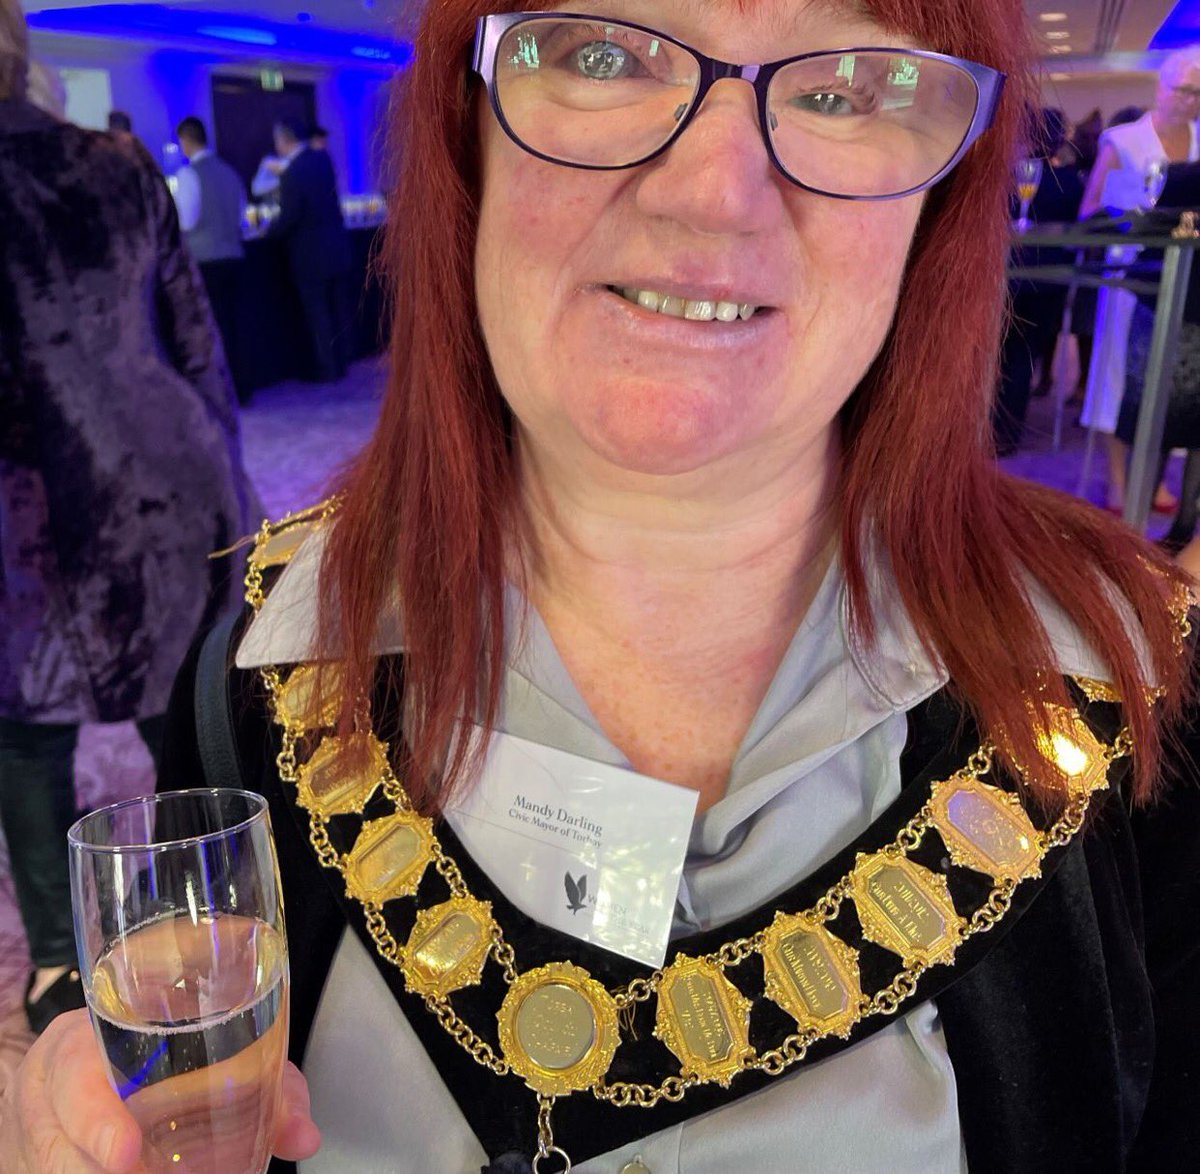 I'm at the marvelous @womenofyear Lunch and Awards 2022 today at the Royal Lancaster London. I'm on table 42 come and say hi if you are here! Already met some wonderful inspirational women, Lady Louise Vaughan, Chair of Women of the Year and Mandy Darling civic mayor of Torbay!